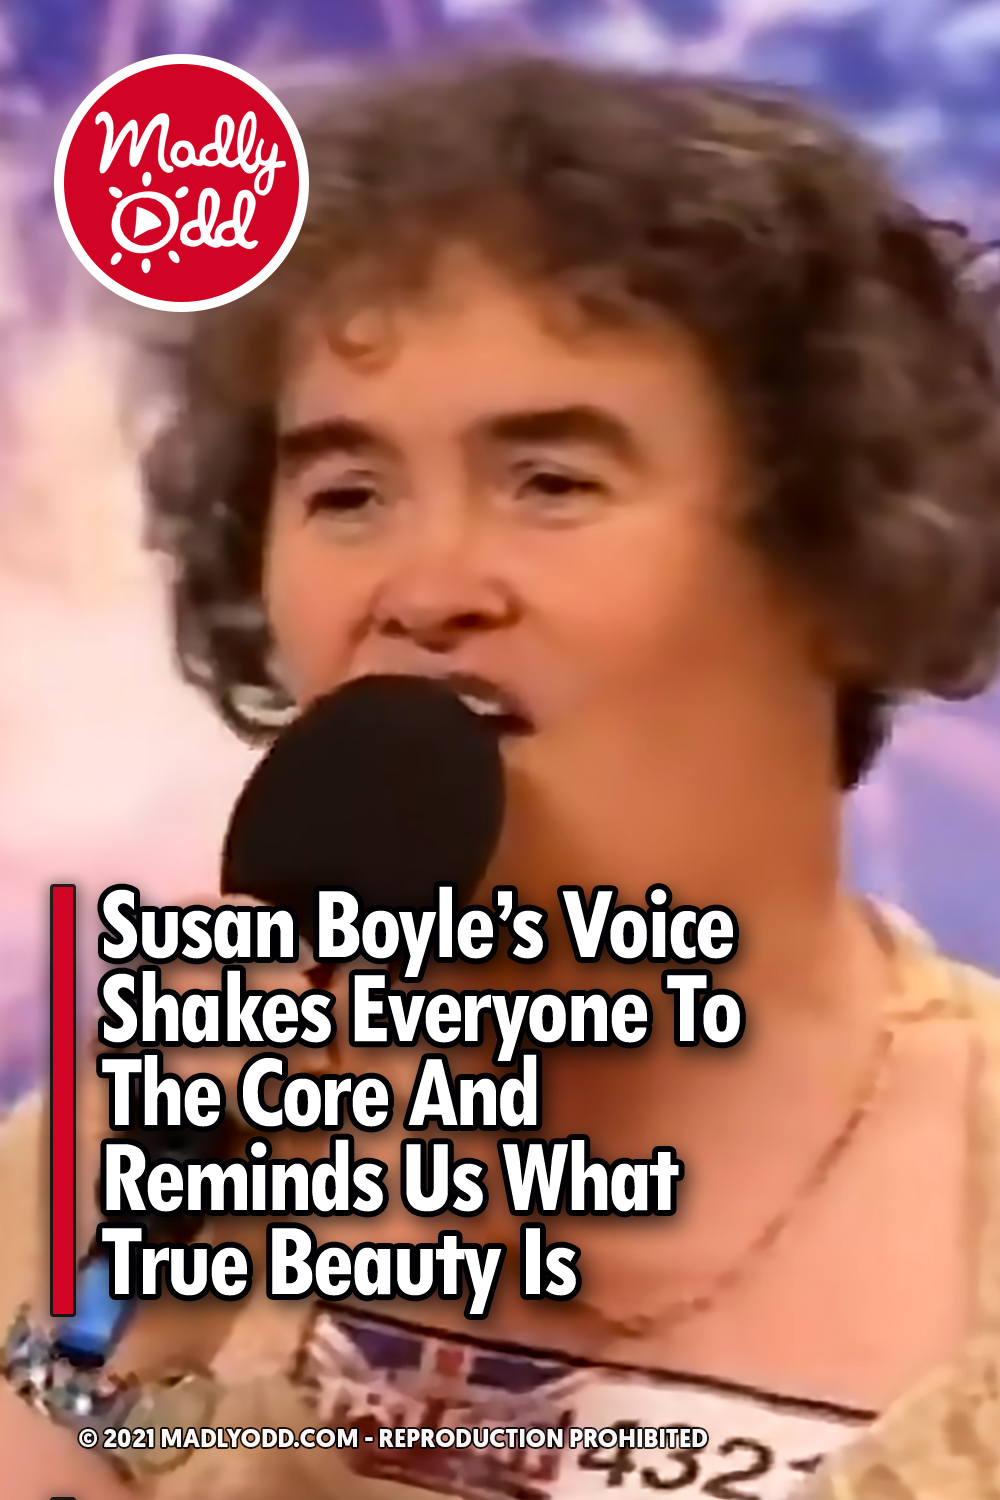 Susan Boyle’s Voice Shakes Everyone To The Core And Reminds Us What True Beauty Is